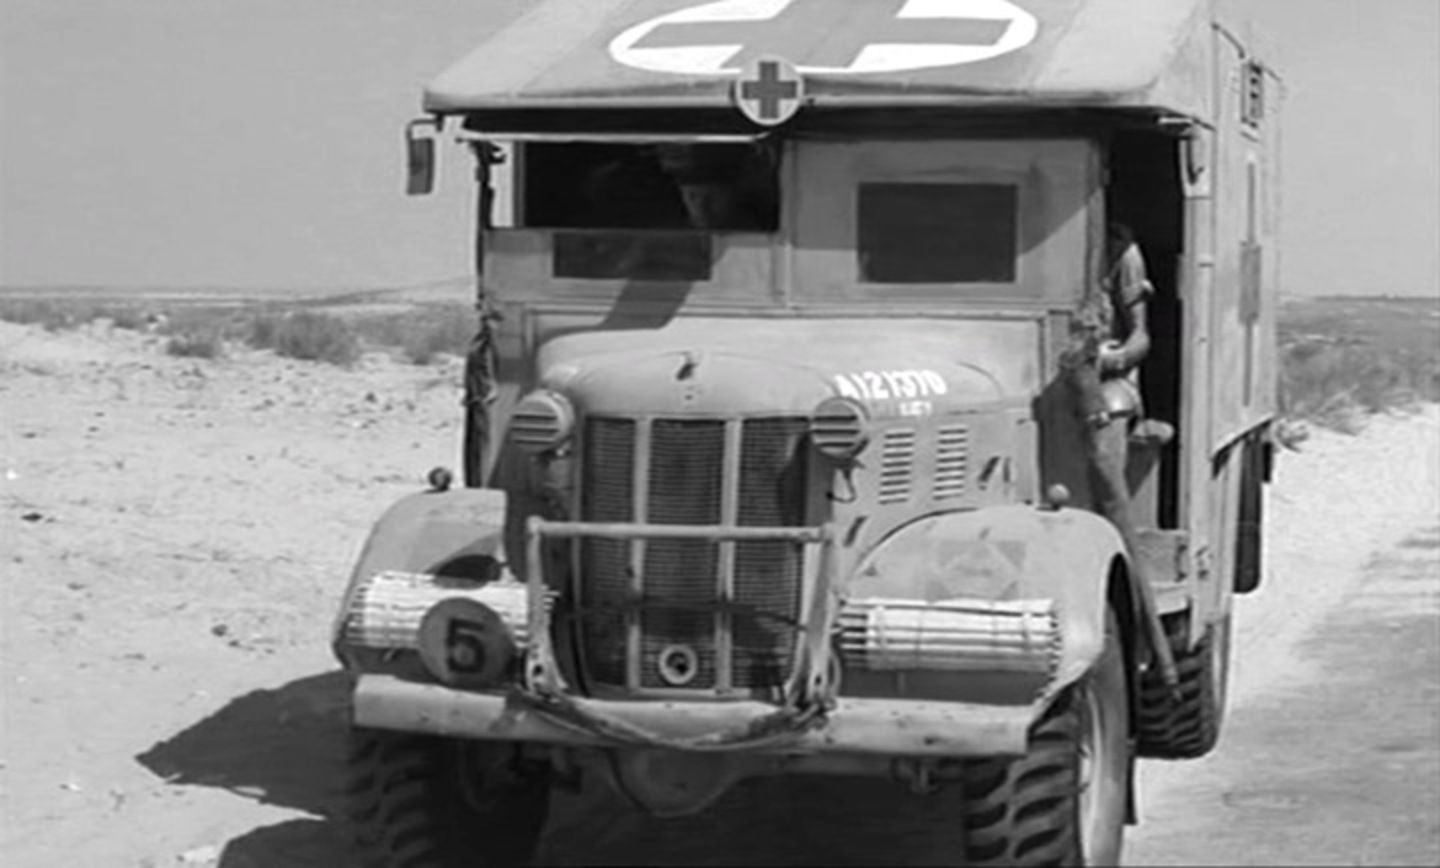 IMCDb.org: Austin K2/Y on CMP 4x4 Chassis in "Ice-Cold in Alex, 1958"